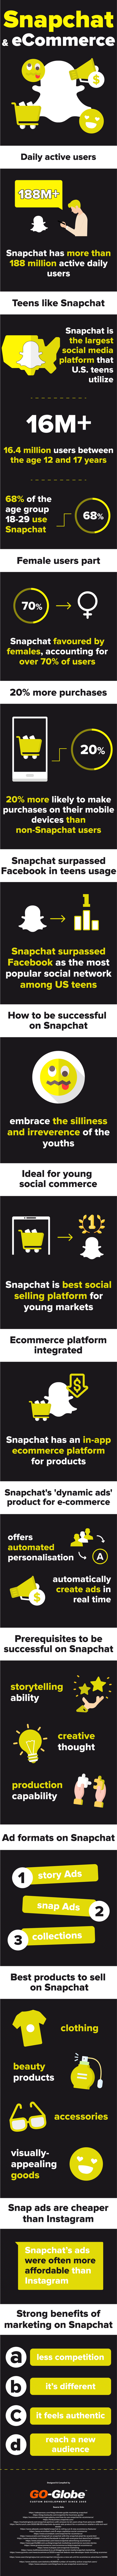 Snapchat and eCommerce 